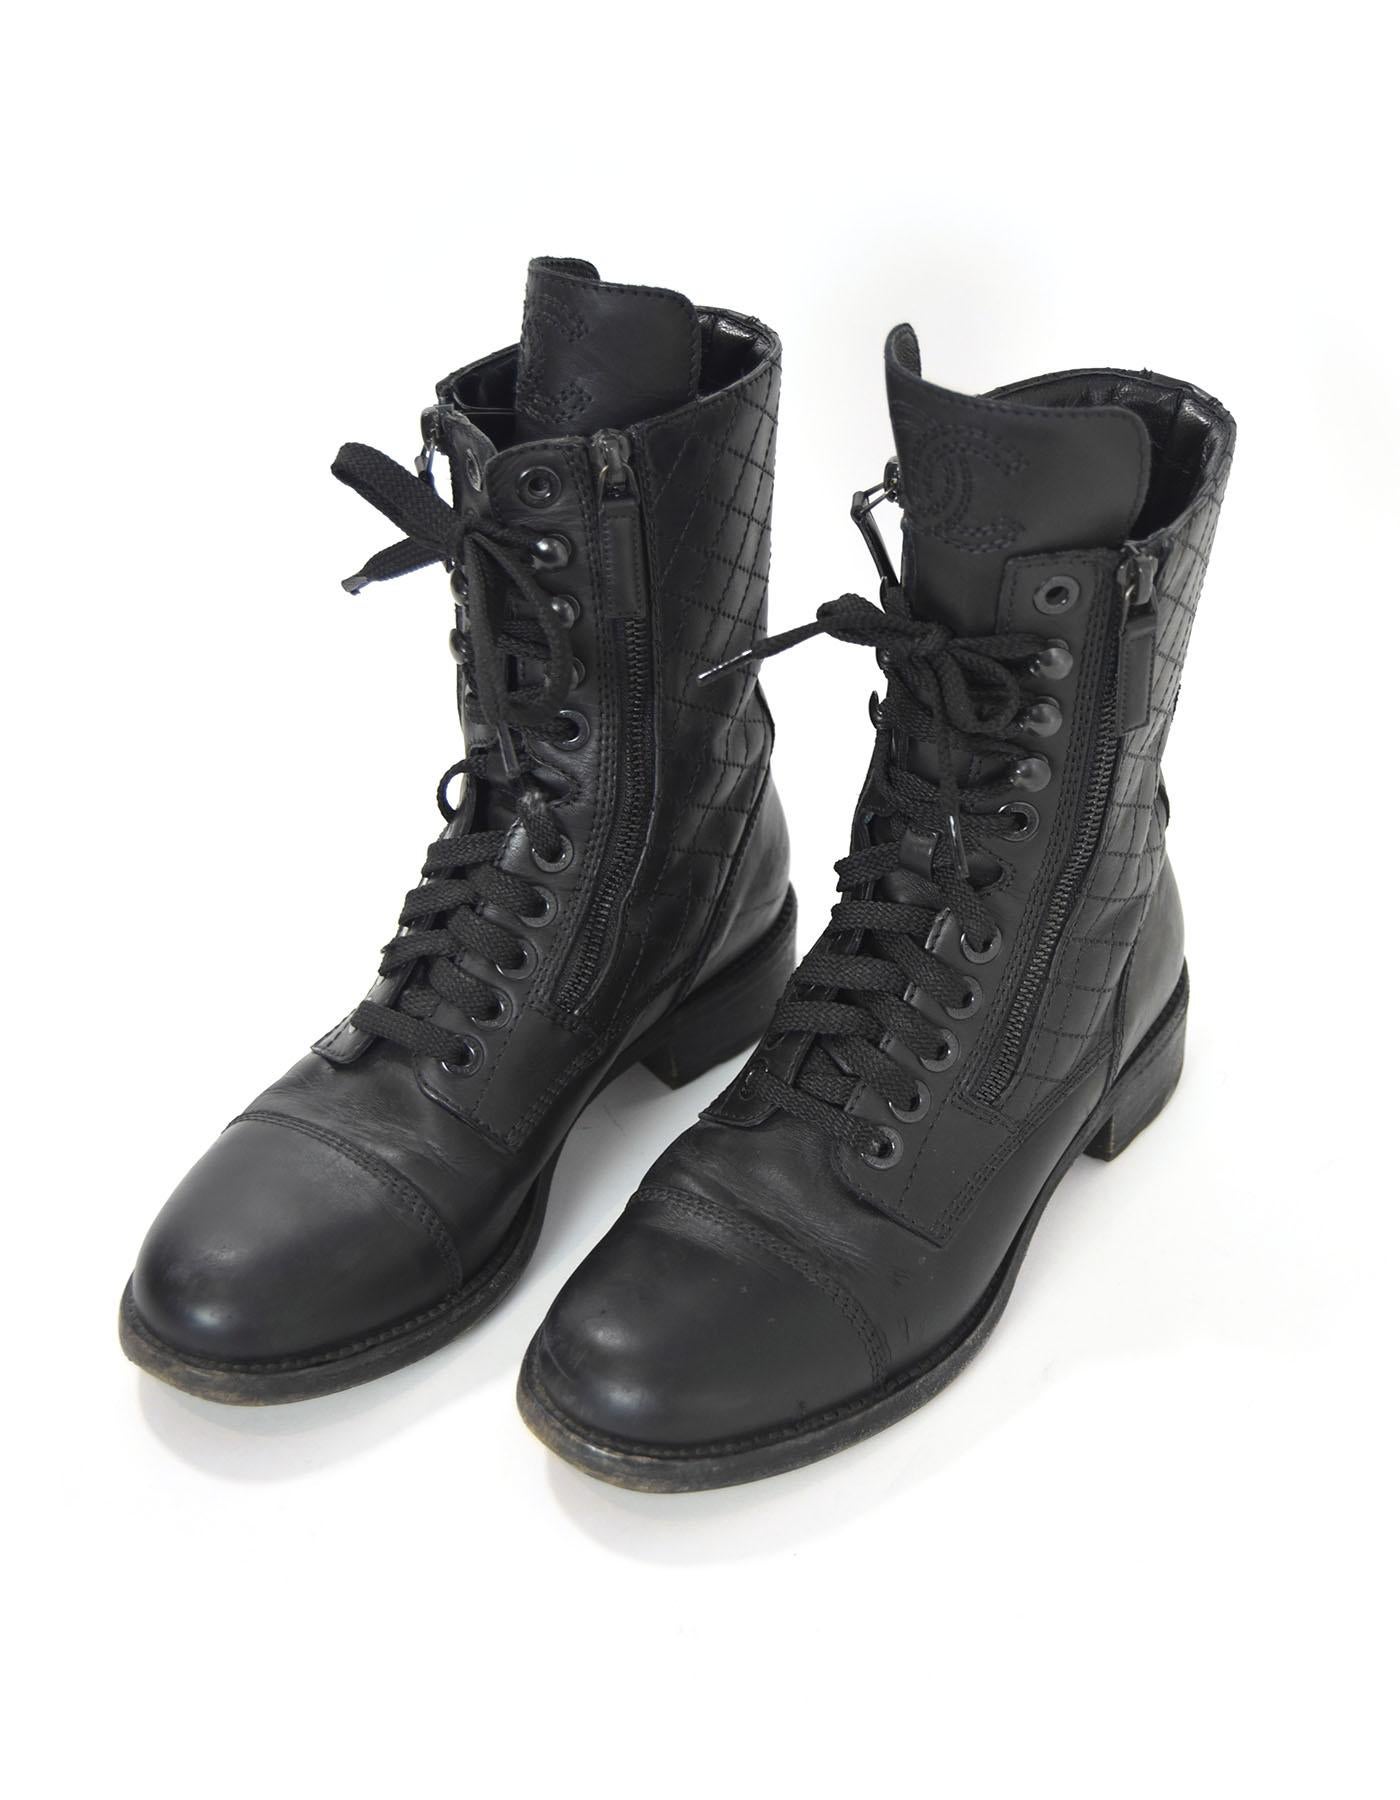 Chanel Black Quilted Leather Combat Boots Sz 38.5

Made In: Italy
Color: Black
Materials: Leather
Closure/Opening: Lace tie and zip closure
Sole Stamp: Chanel Made in Italy 38.5
Overall Condition: Excellent pre-owned condition with the exception of